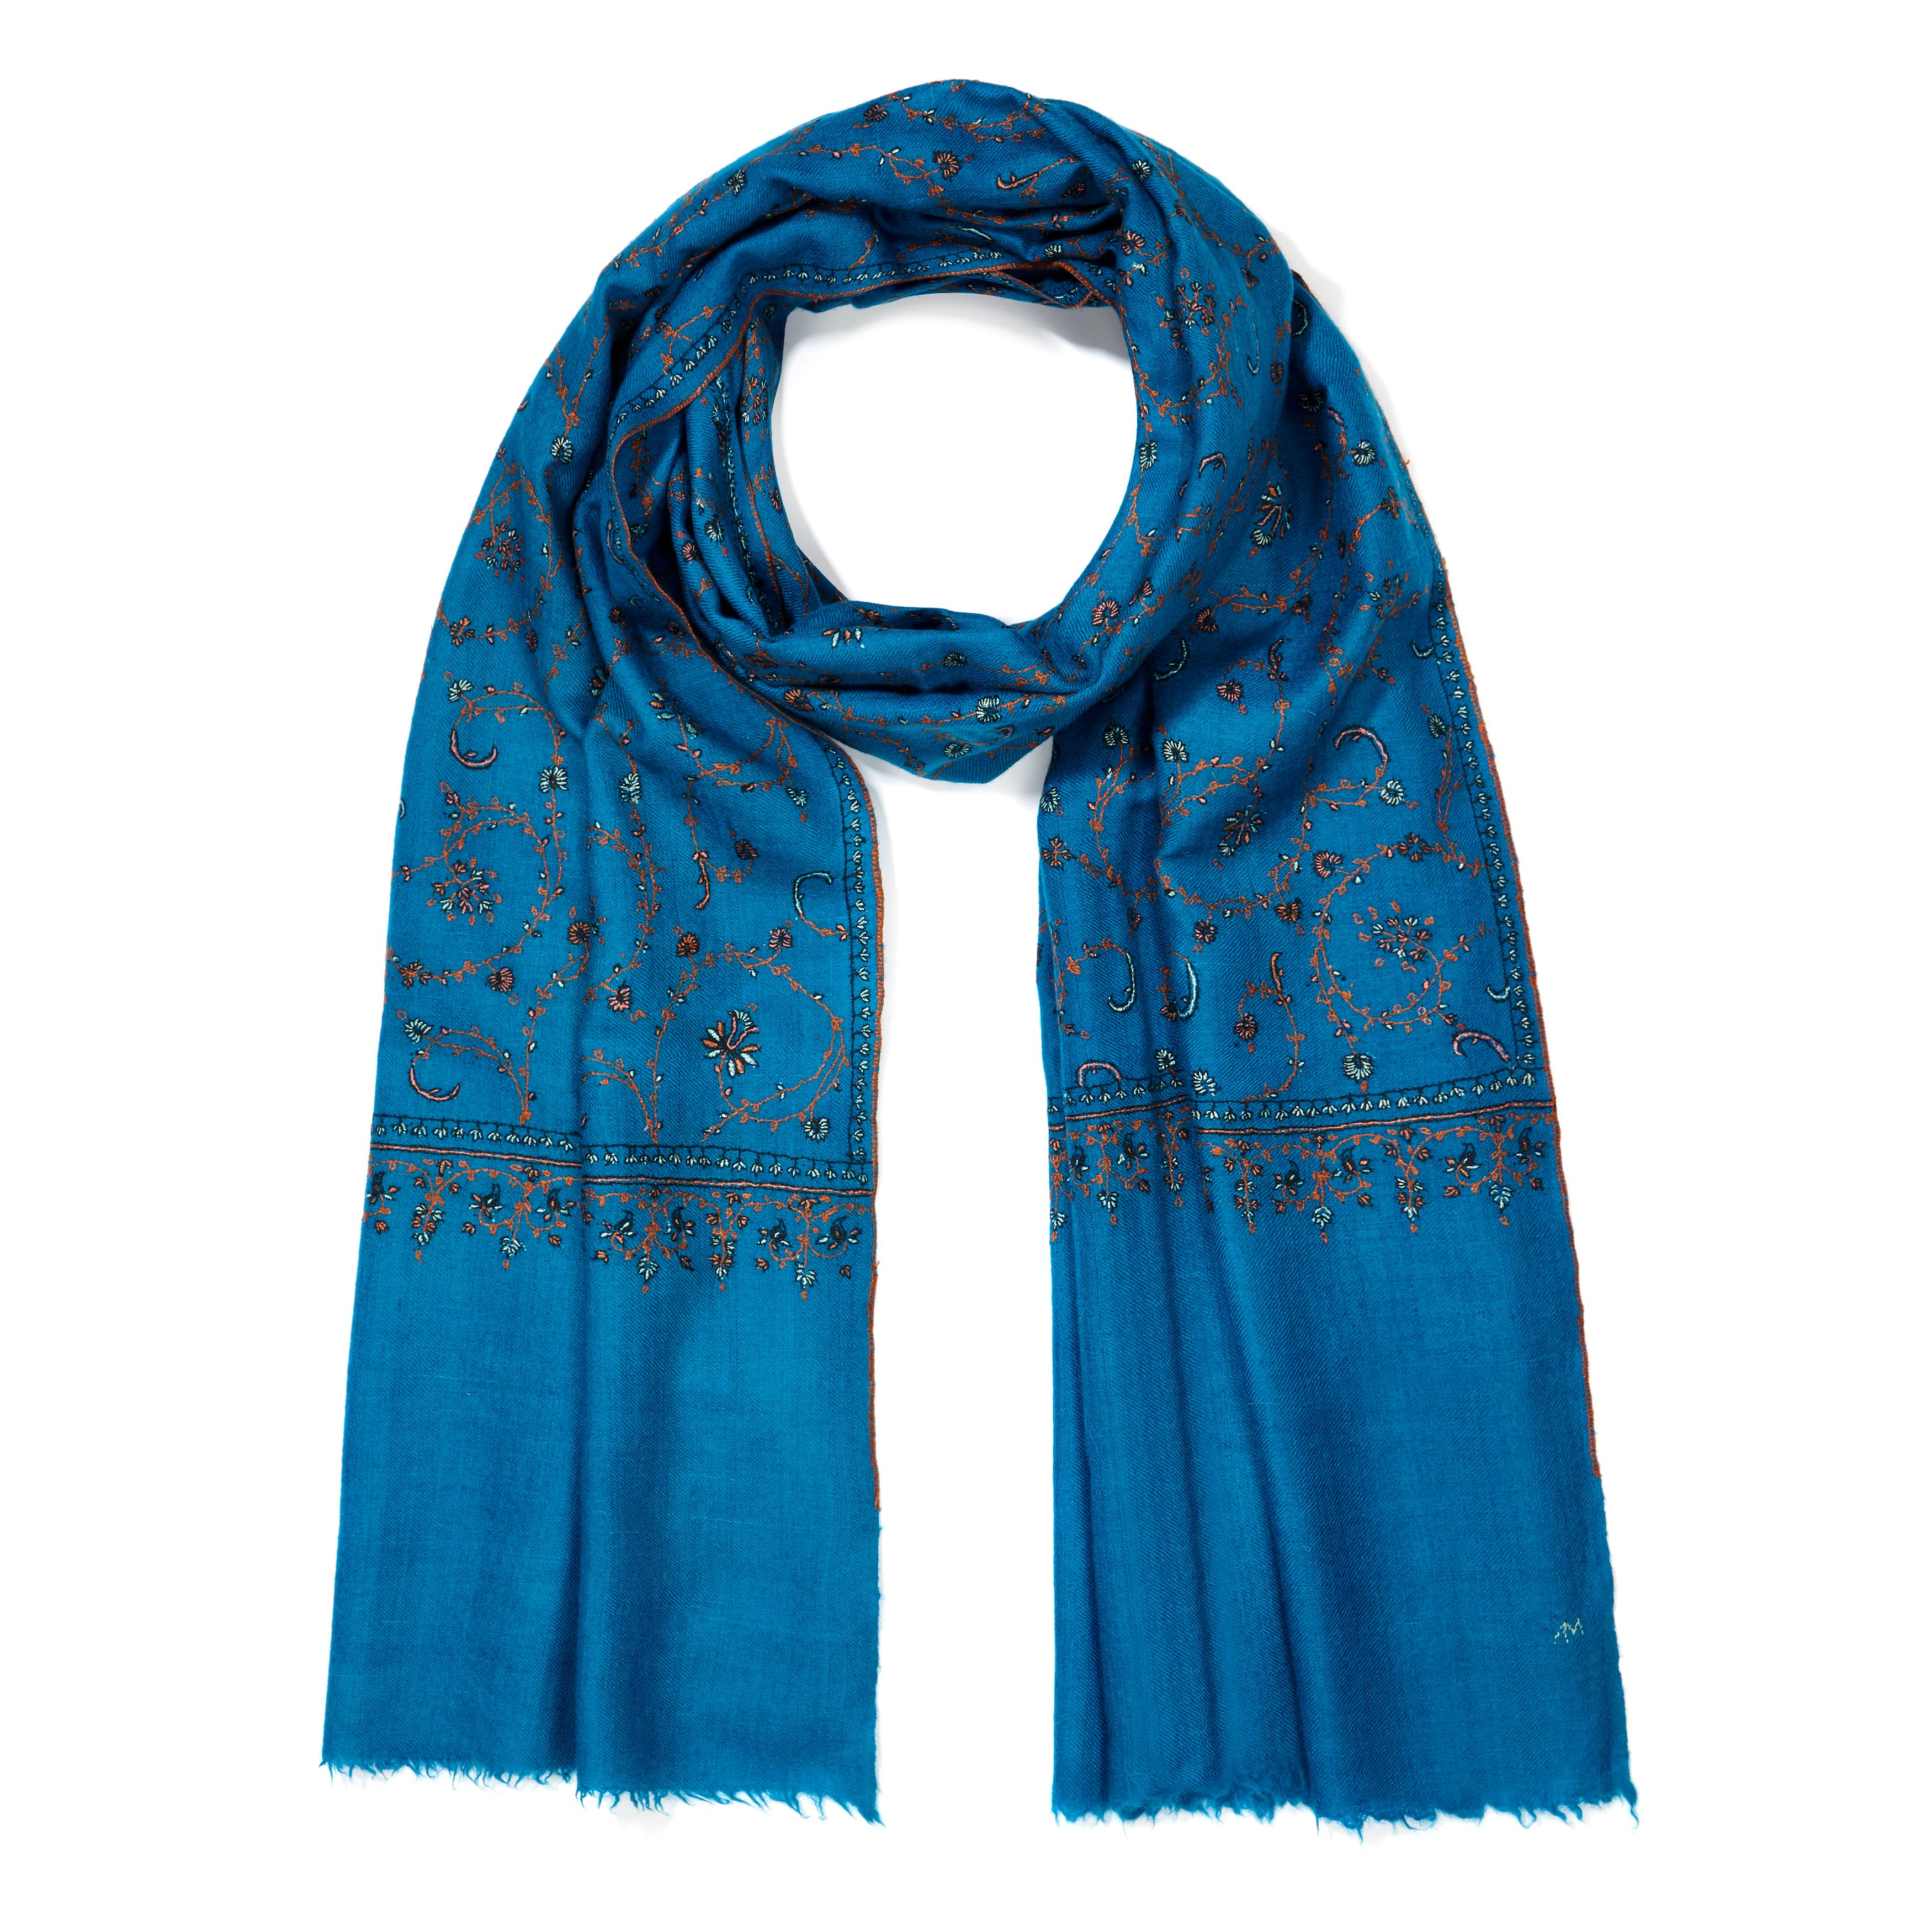 Limited Edition Hand Embroidered Cashmere Shawl in Blue Made in Kashmir - Gift im Zustand „Neu“ in London, GB